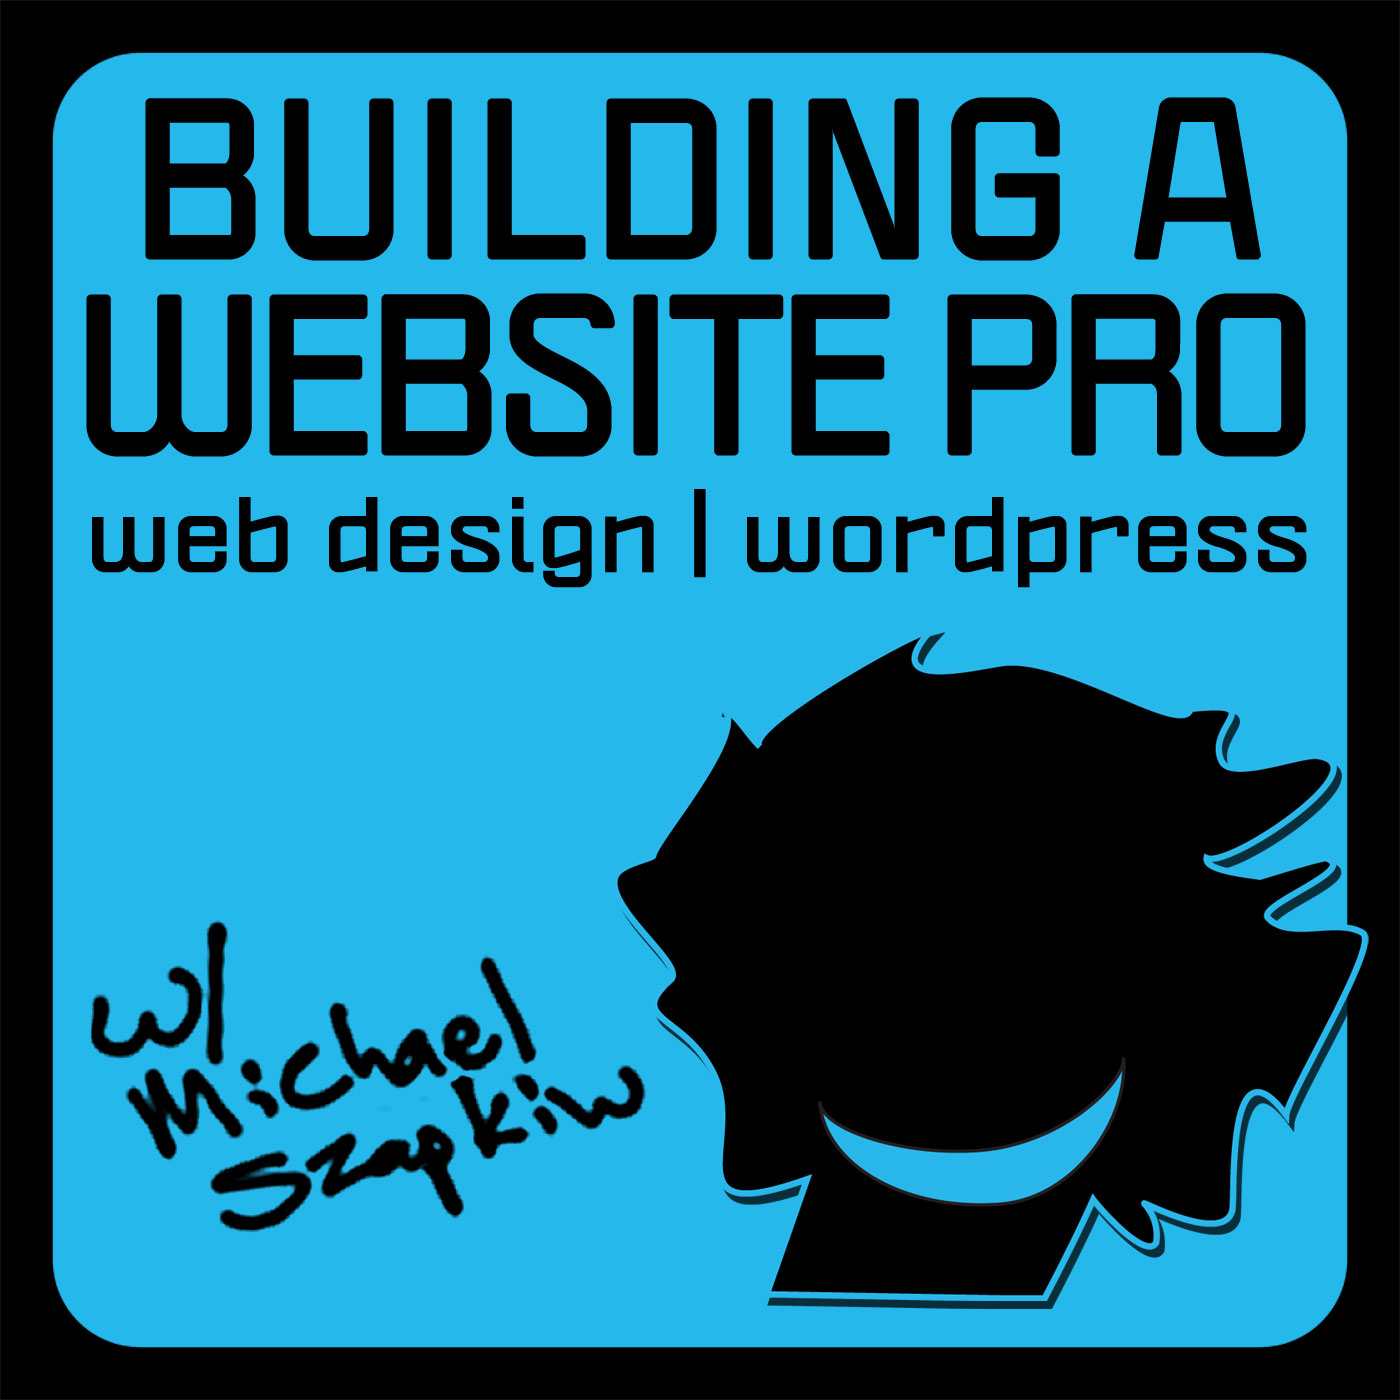 Building a Website Pro: Wordpress Training, How to Build a Website, Web Design for Small Business, Entrepreneurs & Individuals